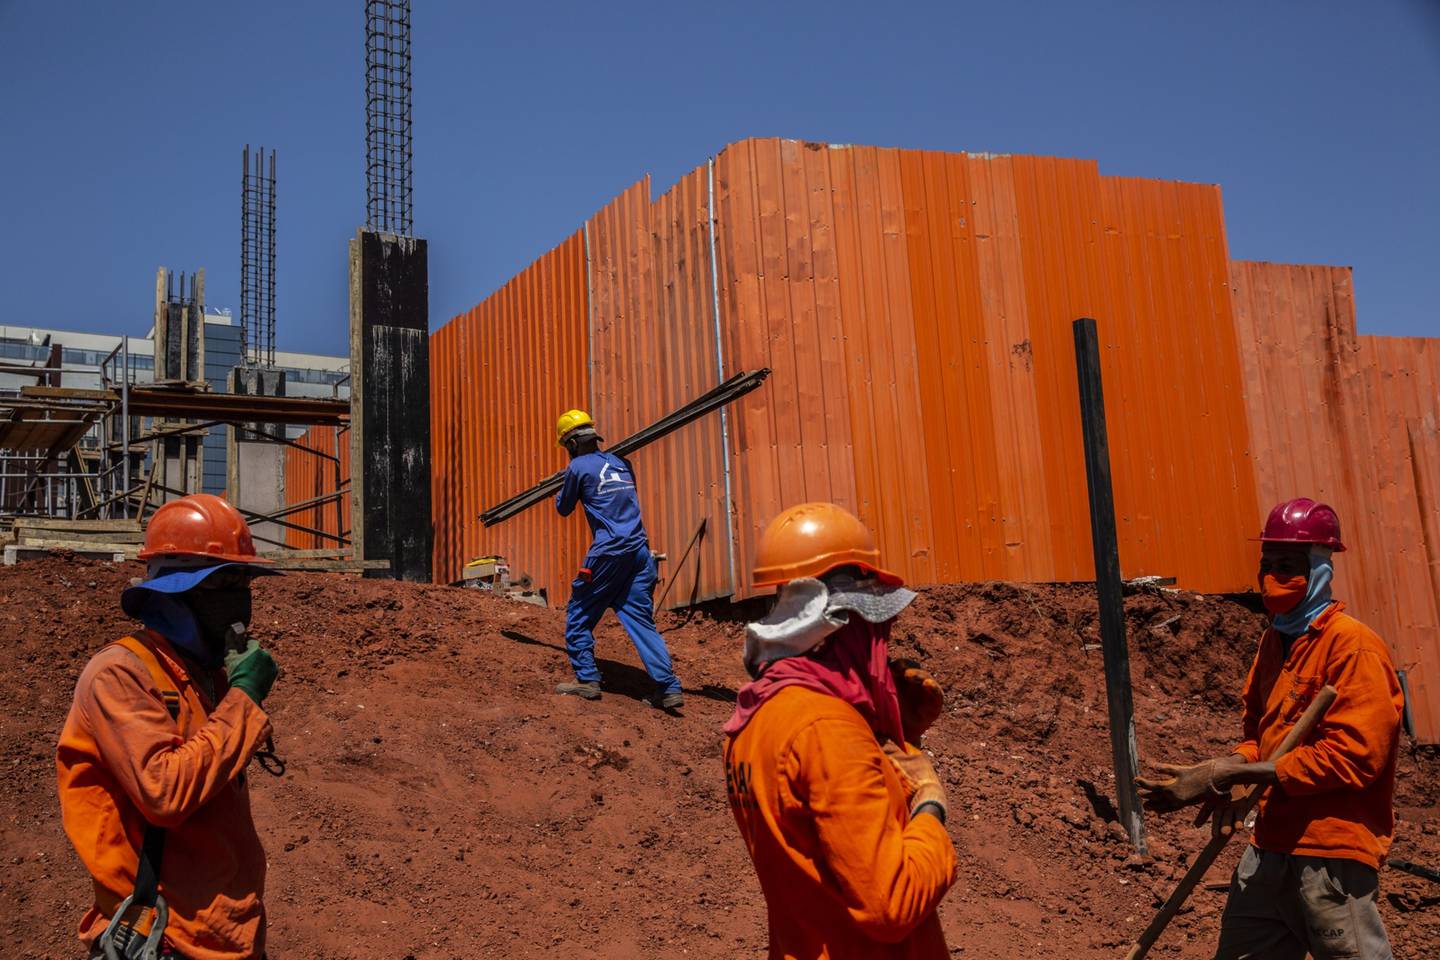 Workers at a construction site in Brasilia, Brazil.